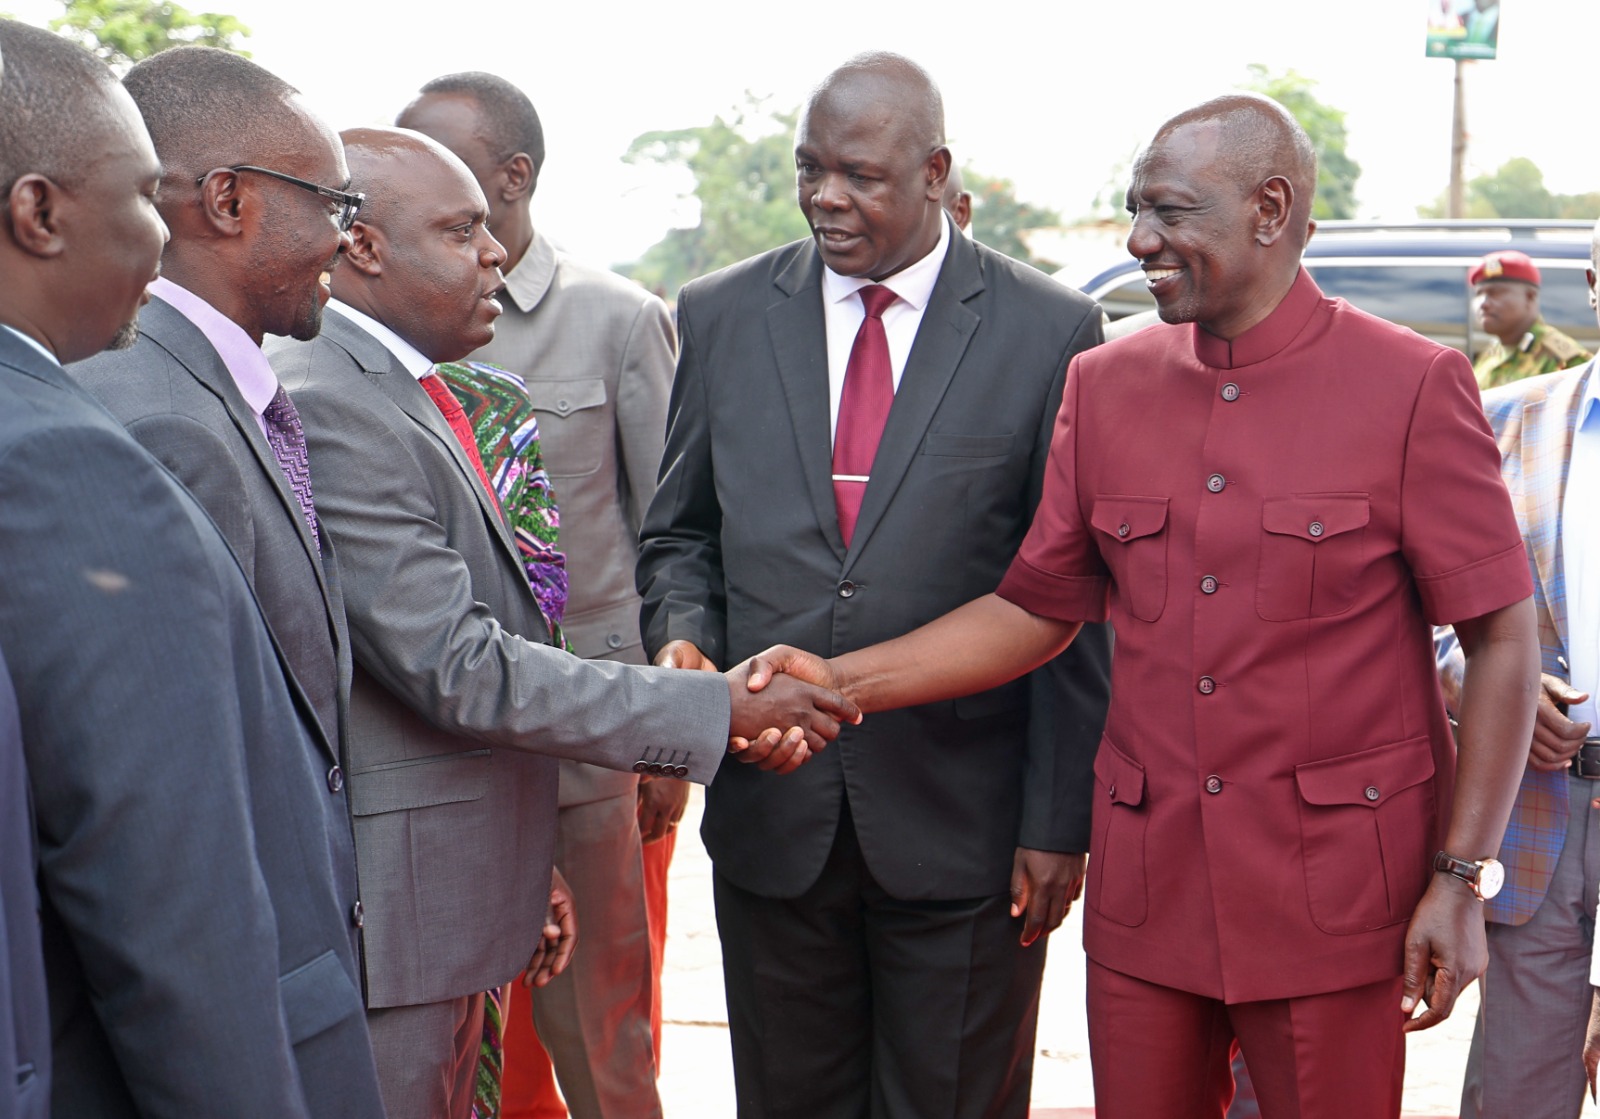 H.E. President William Ruto received by the leadership of Bungoma County Assembly led by Speaker Hon Emmanuel Situma,Dep Speaker Hon Stephen Wamalwa,Leader of Majority and Clerk